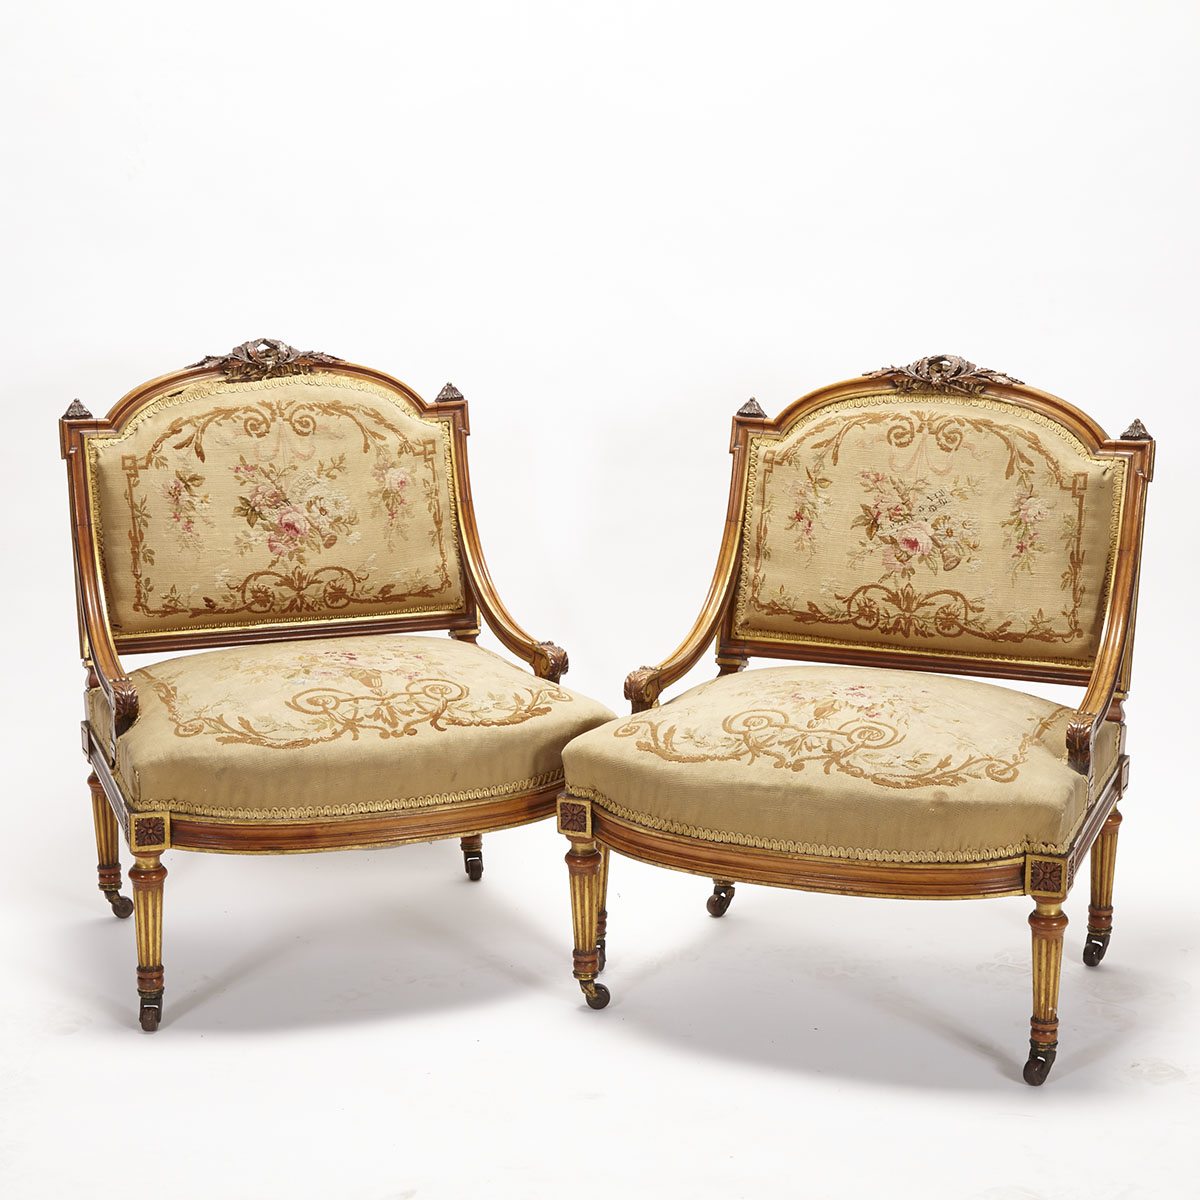 Pair of Parcel Gilt Carved Walnut Low Fauteuils, 19th century